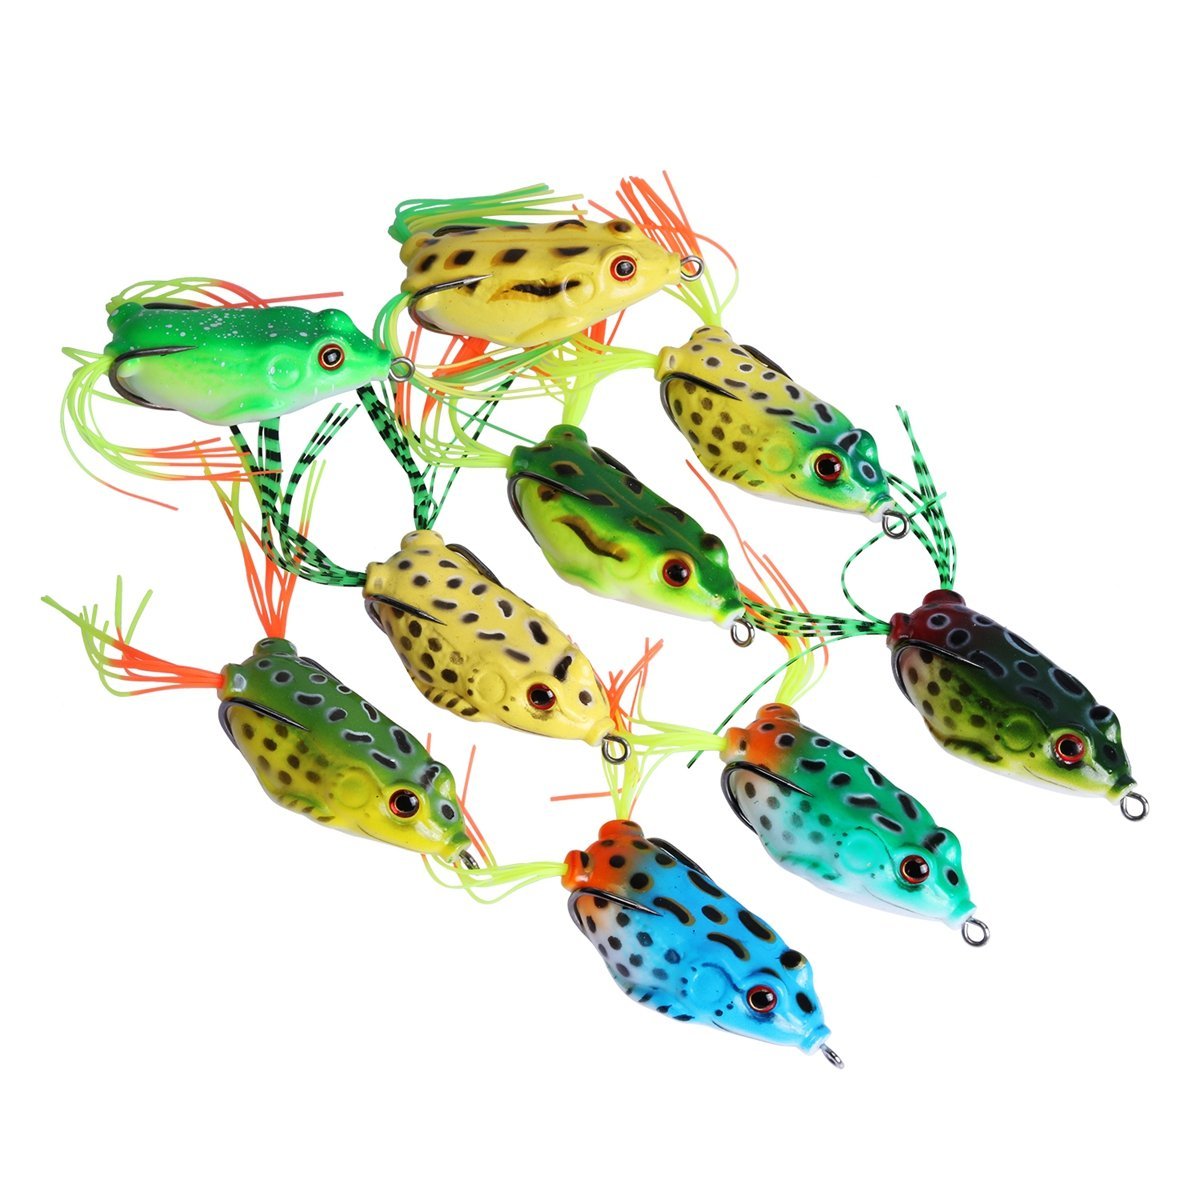 9Pcs/Set Metal Spoon Fishing Lures Spoon Hard Bait Tackle Accessories New